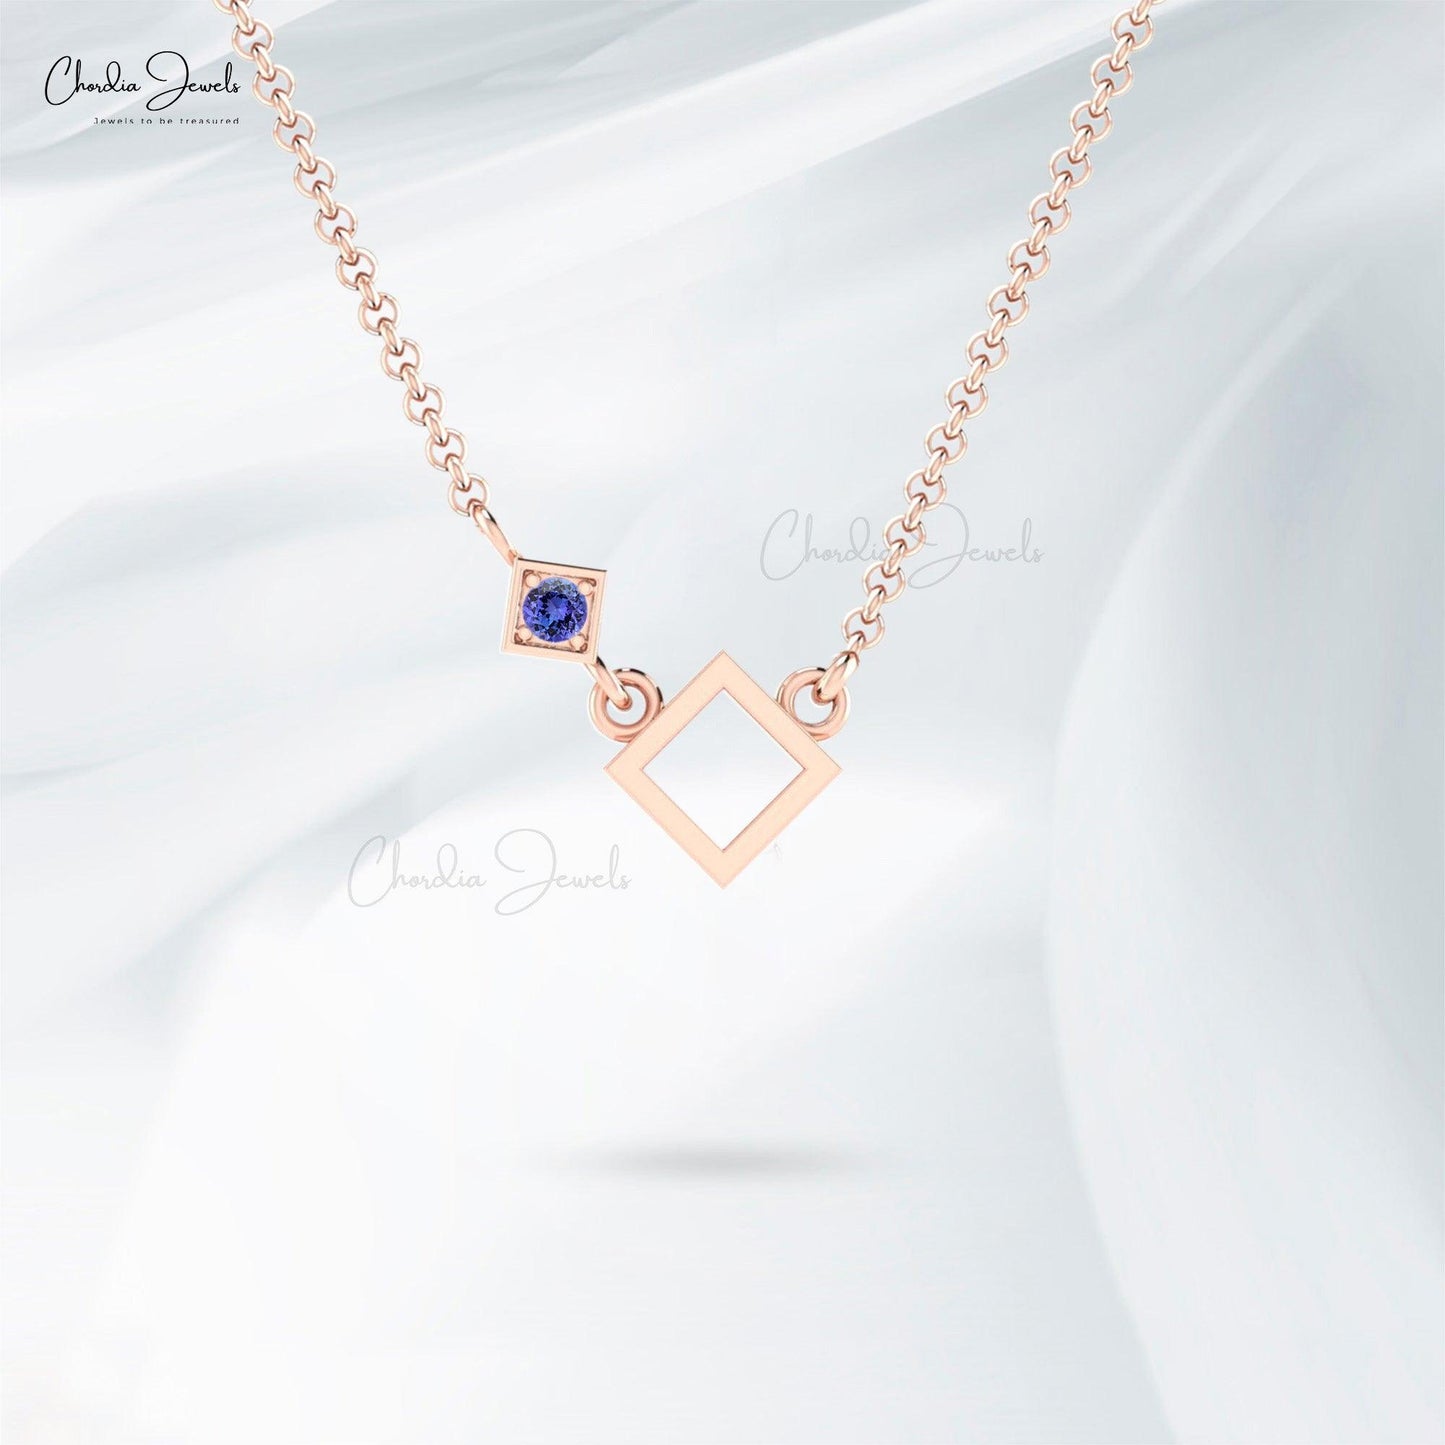 0.08 Ct Round Cut Gemstone Necklace, Genuine Tanzanite Necklace, 14K Real Gold Open Square Necklace, Lite Weight Jewelry For Anniversary Gift - Chordia Jewels